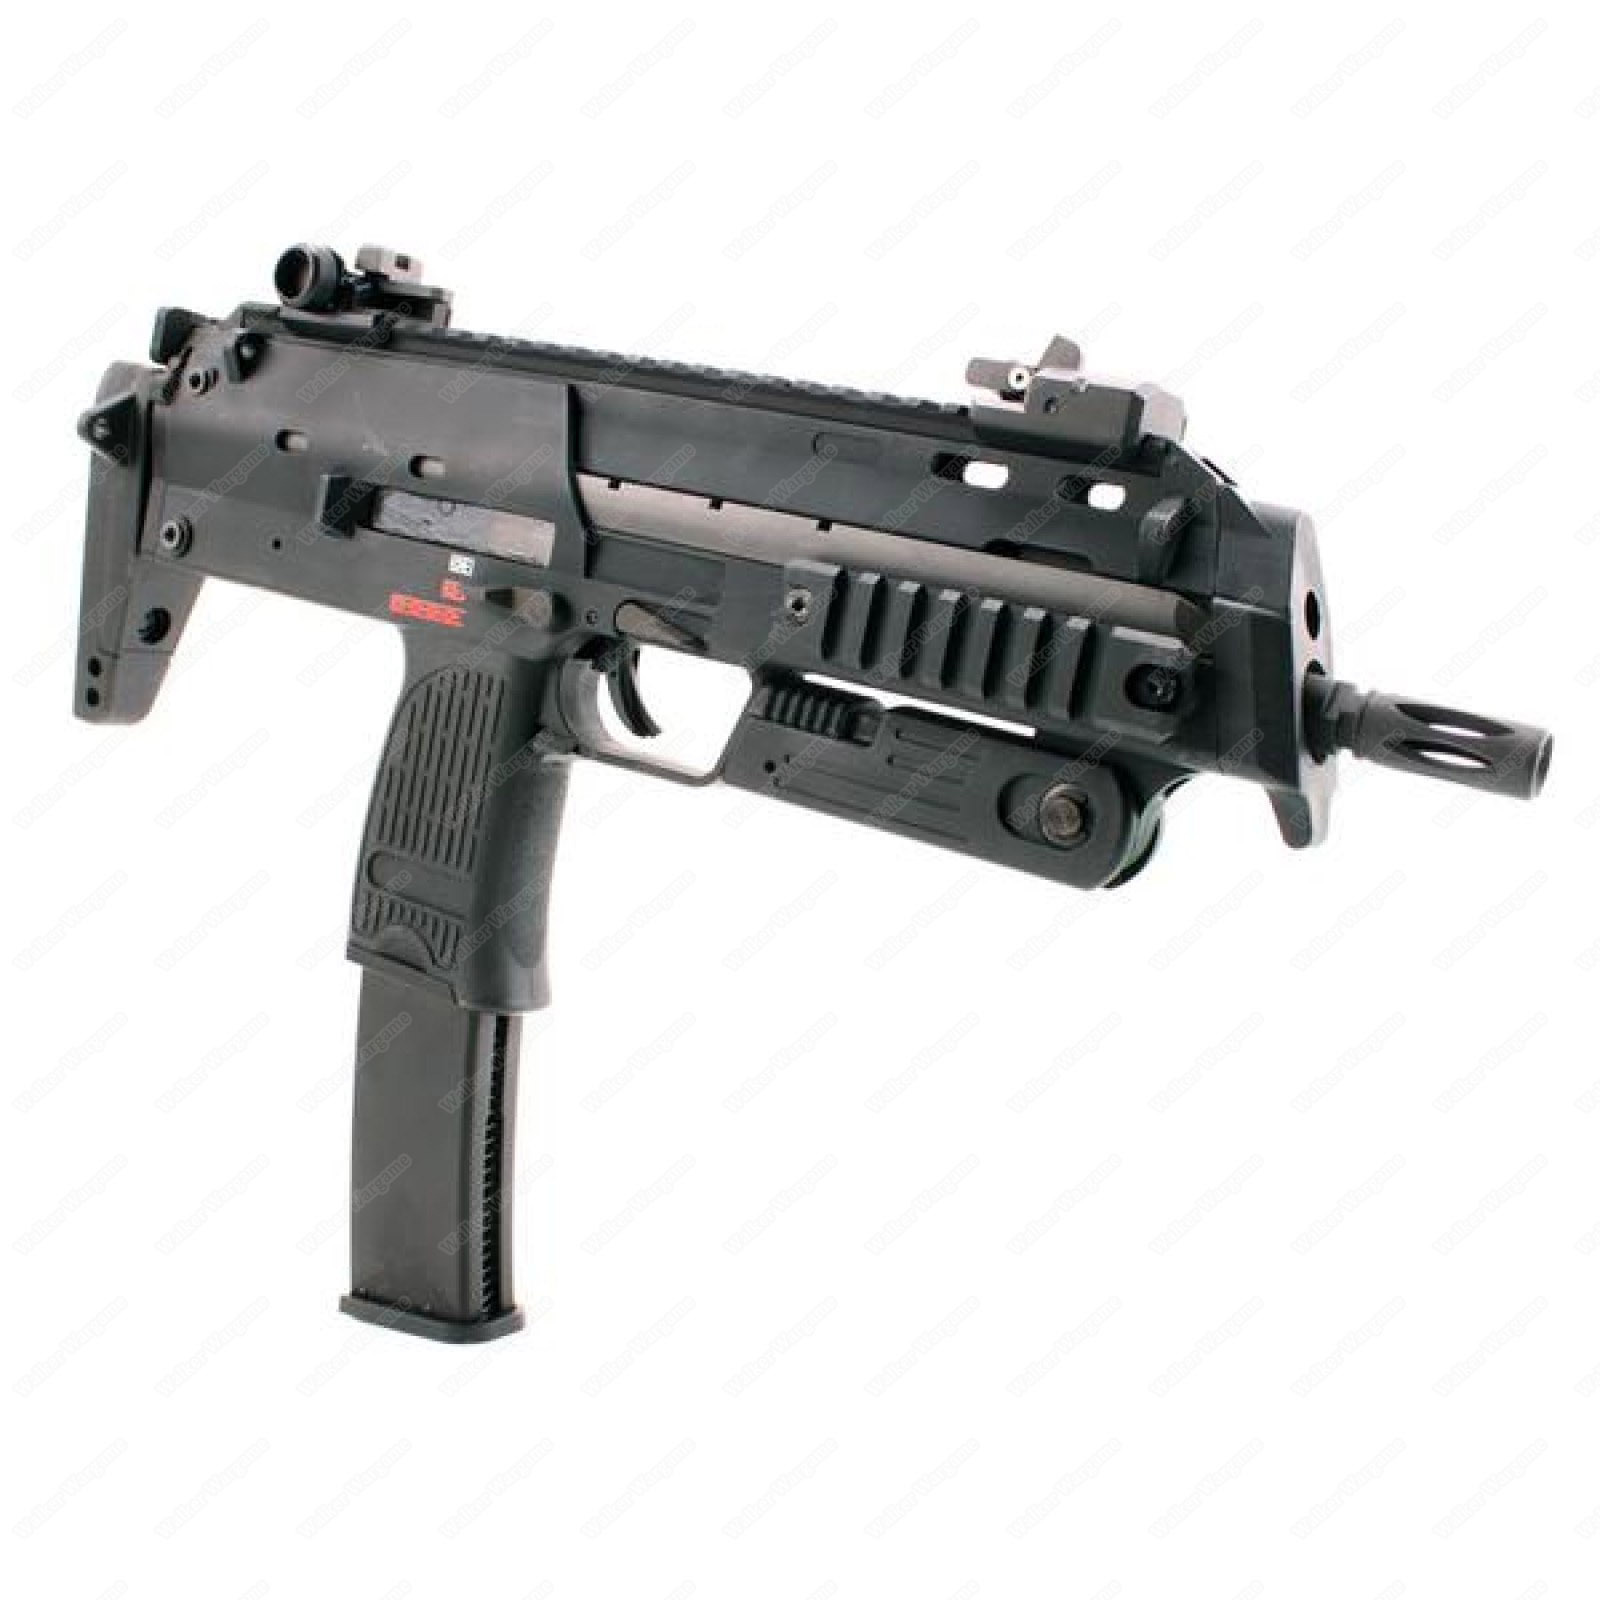 WE SMG8 MP7 Green Gas Blow Back SMG - Black New Model Quick Overview WE SMG...